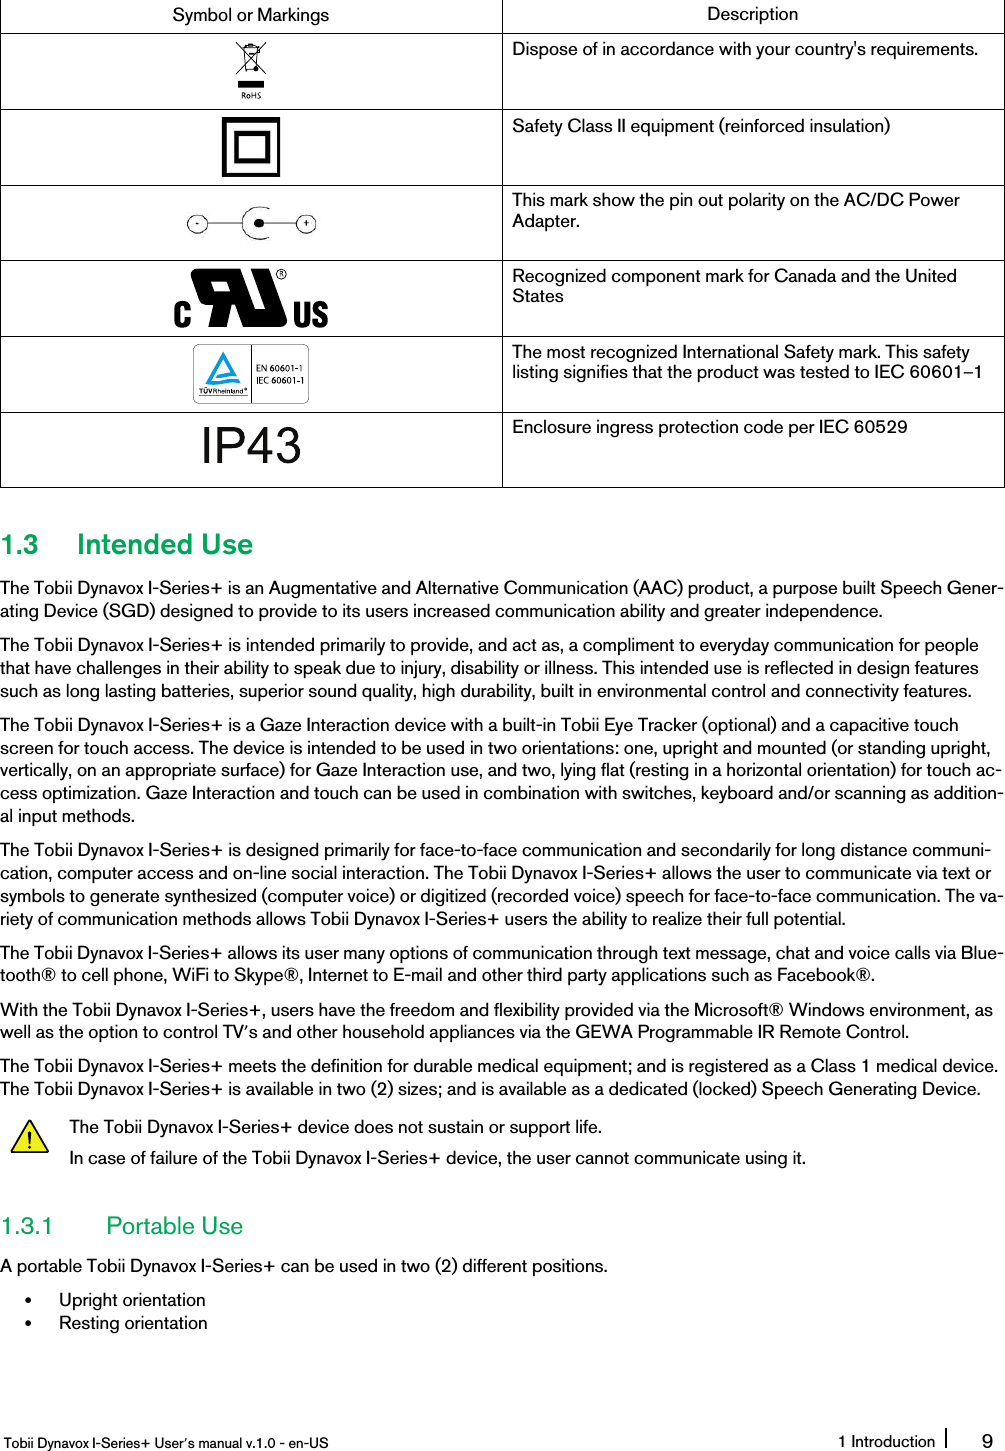 Symbol or Markings DescriptionDispose of in accordance with your country&apos;s requirements.Safety Class II equipment (reinforced insulation)This mark show the pin out polarity on the AC/DC PowerAdapter.Recognized component mark for Canada and the UnitedStatesThe most recognized International Safety mark. This safetylisting signifies that the product was tested to IEC 60601–1Enclosure ingress protection code per IEC 605291.3 Intended UseThe Tobii Dynavox I-Series+ is an Augmentative and Alternative Communication (AAC) product, a purpose built Speech Gener-ating Device (SGD) designed to provide to its users increased communication ability and greater independence.The Tobii Dynavox I-Series+ is intended primarily to provide, and act as, a compliment to everyday communication for peoplethat have challenges in their ability to speak due to injury, disability or illness. This intended use is reflected in design featuressuch as long lasting batteries, superior sound quality, high durability, built in environmental control and connectivity features.The Tobii Dynavox I-Series+ is a Gaze Interaction device with a built-in Tobii Eye Tracker (optional) and a capacitive touchscreen for touch access. The device is intended to be used in two orientations: one, upright and mounted (or standing upright,vertically, on an appropriate surface) for Gaze Interaction use, and two, lying flat (resting in a horizontal orientation) for touch ac-cess optimization. Gaze Interaction and touch can be used in combination with switches, keyboard and/or scanning as addition-al input methods.The Tobii Dynavox I-Series+ is designed primarily for face-to-face communication and secondarily for long distance communi-cation, computer access and on-line social interaction. The Tobii Dynavox I-Series+ allows the user to communicate via text orsymbols to generate synthesized (computer voice) or digitized (recorded voice) speech for face-to-face communication. The va-riety of communication methods allows Tobii Dynavox I-Series+ users the ability to realize their full potential.The Tobii Dynavox I-Series+ allows its user many options of communication through text message, chat and voice calls via Blue-tooth® to cell phone, WiFi to Skype®, Internet to E-mail and other third party applications such as Facebook®.With the Tobii Dynavox I-Series+, users have the freedom and flexibility provided via the Microsoft® Windows environment, aswell as the option to control TV’s and other household appliances via the GEWA Programmable IR Remote Control.The Tobii Dynavox I-Series+ meets the definition for durable medical equipment; and is registered as a Class 1 medical device.The Tobii Dynavox I-Series+ is available in two (2) sizes; and is available as a dedicated (locked) Speech Generating Device.The Tobii Dynavox I-Series+ device does not sustain or support life.In case of failure of the Tobii Dynavox I-Series+ device, the user cannot communicate using it.1.3.1 Portable UseA portable Tobii Dynavox I-Series+ can be used in two (2) different positions.•Upright orientation•Resting orientationTobii Dynavox I-Series+ User’s manual v.1.0 - en-US 1 Introduction 9